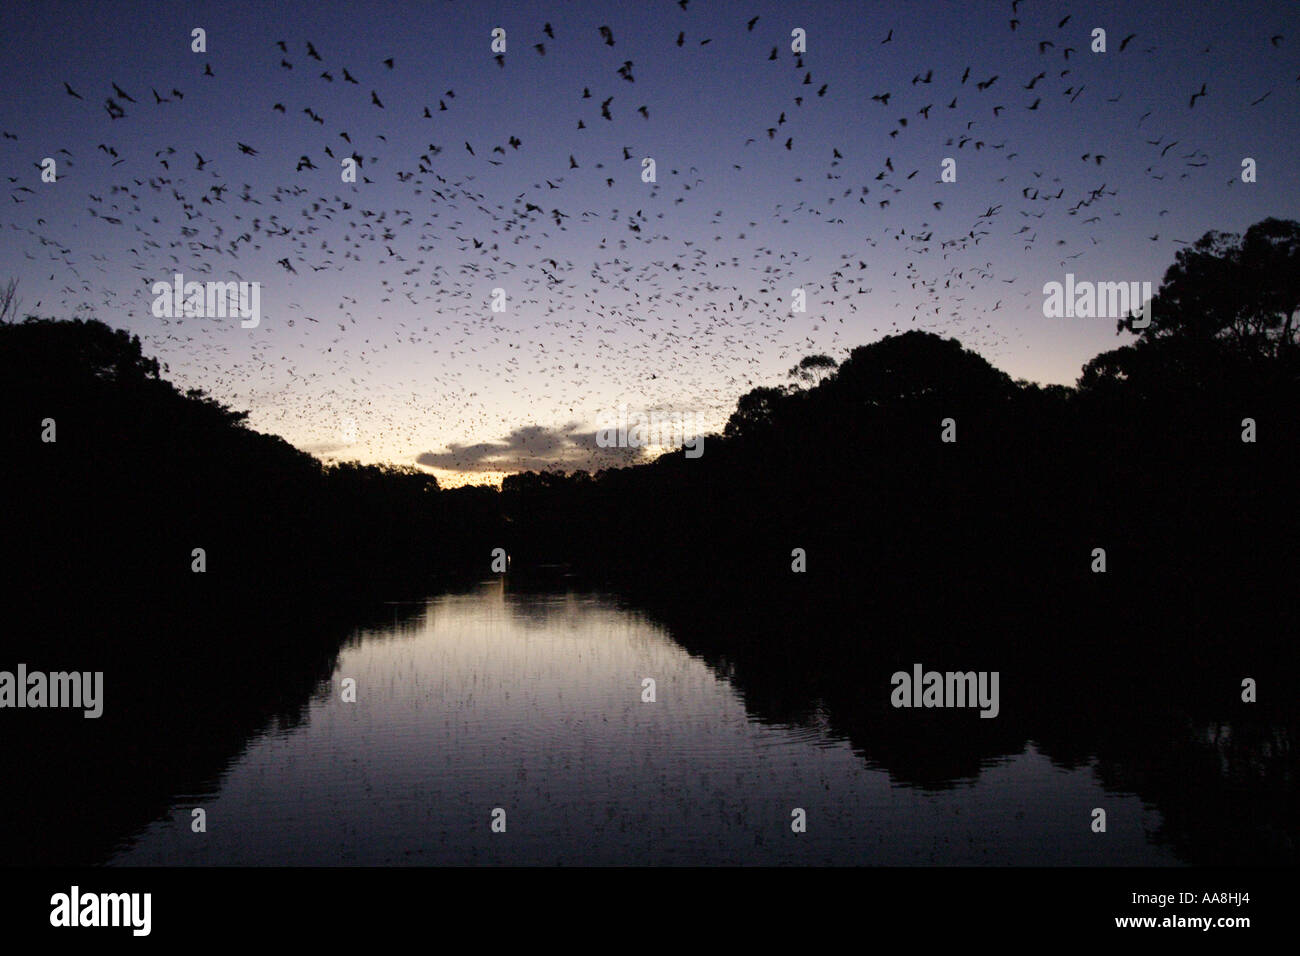 A COLONY OF GREY HEADED FLYING FOXES BAPDB7271 Stock Photo